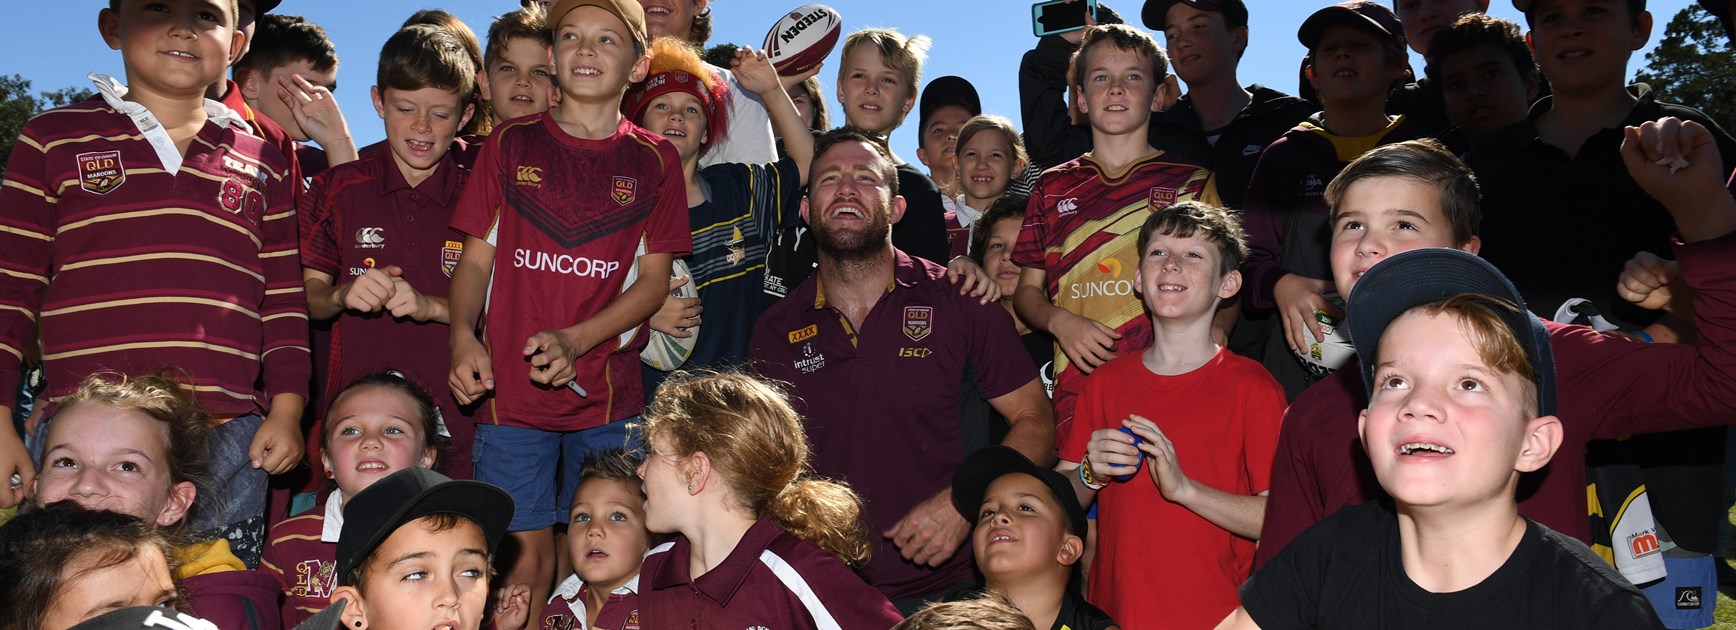 Queensland Maroons set to take over Perth